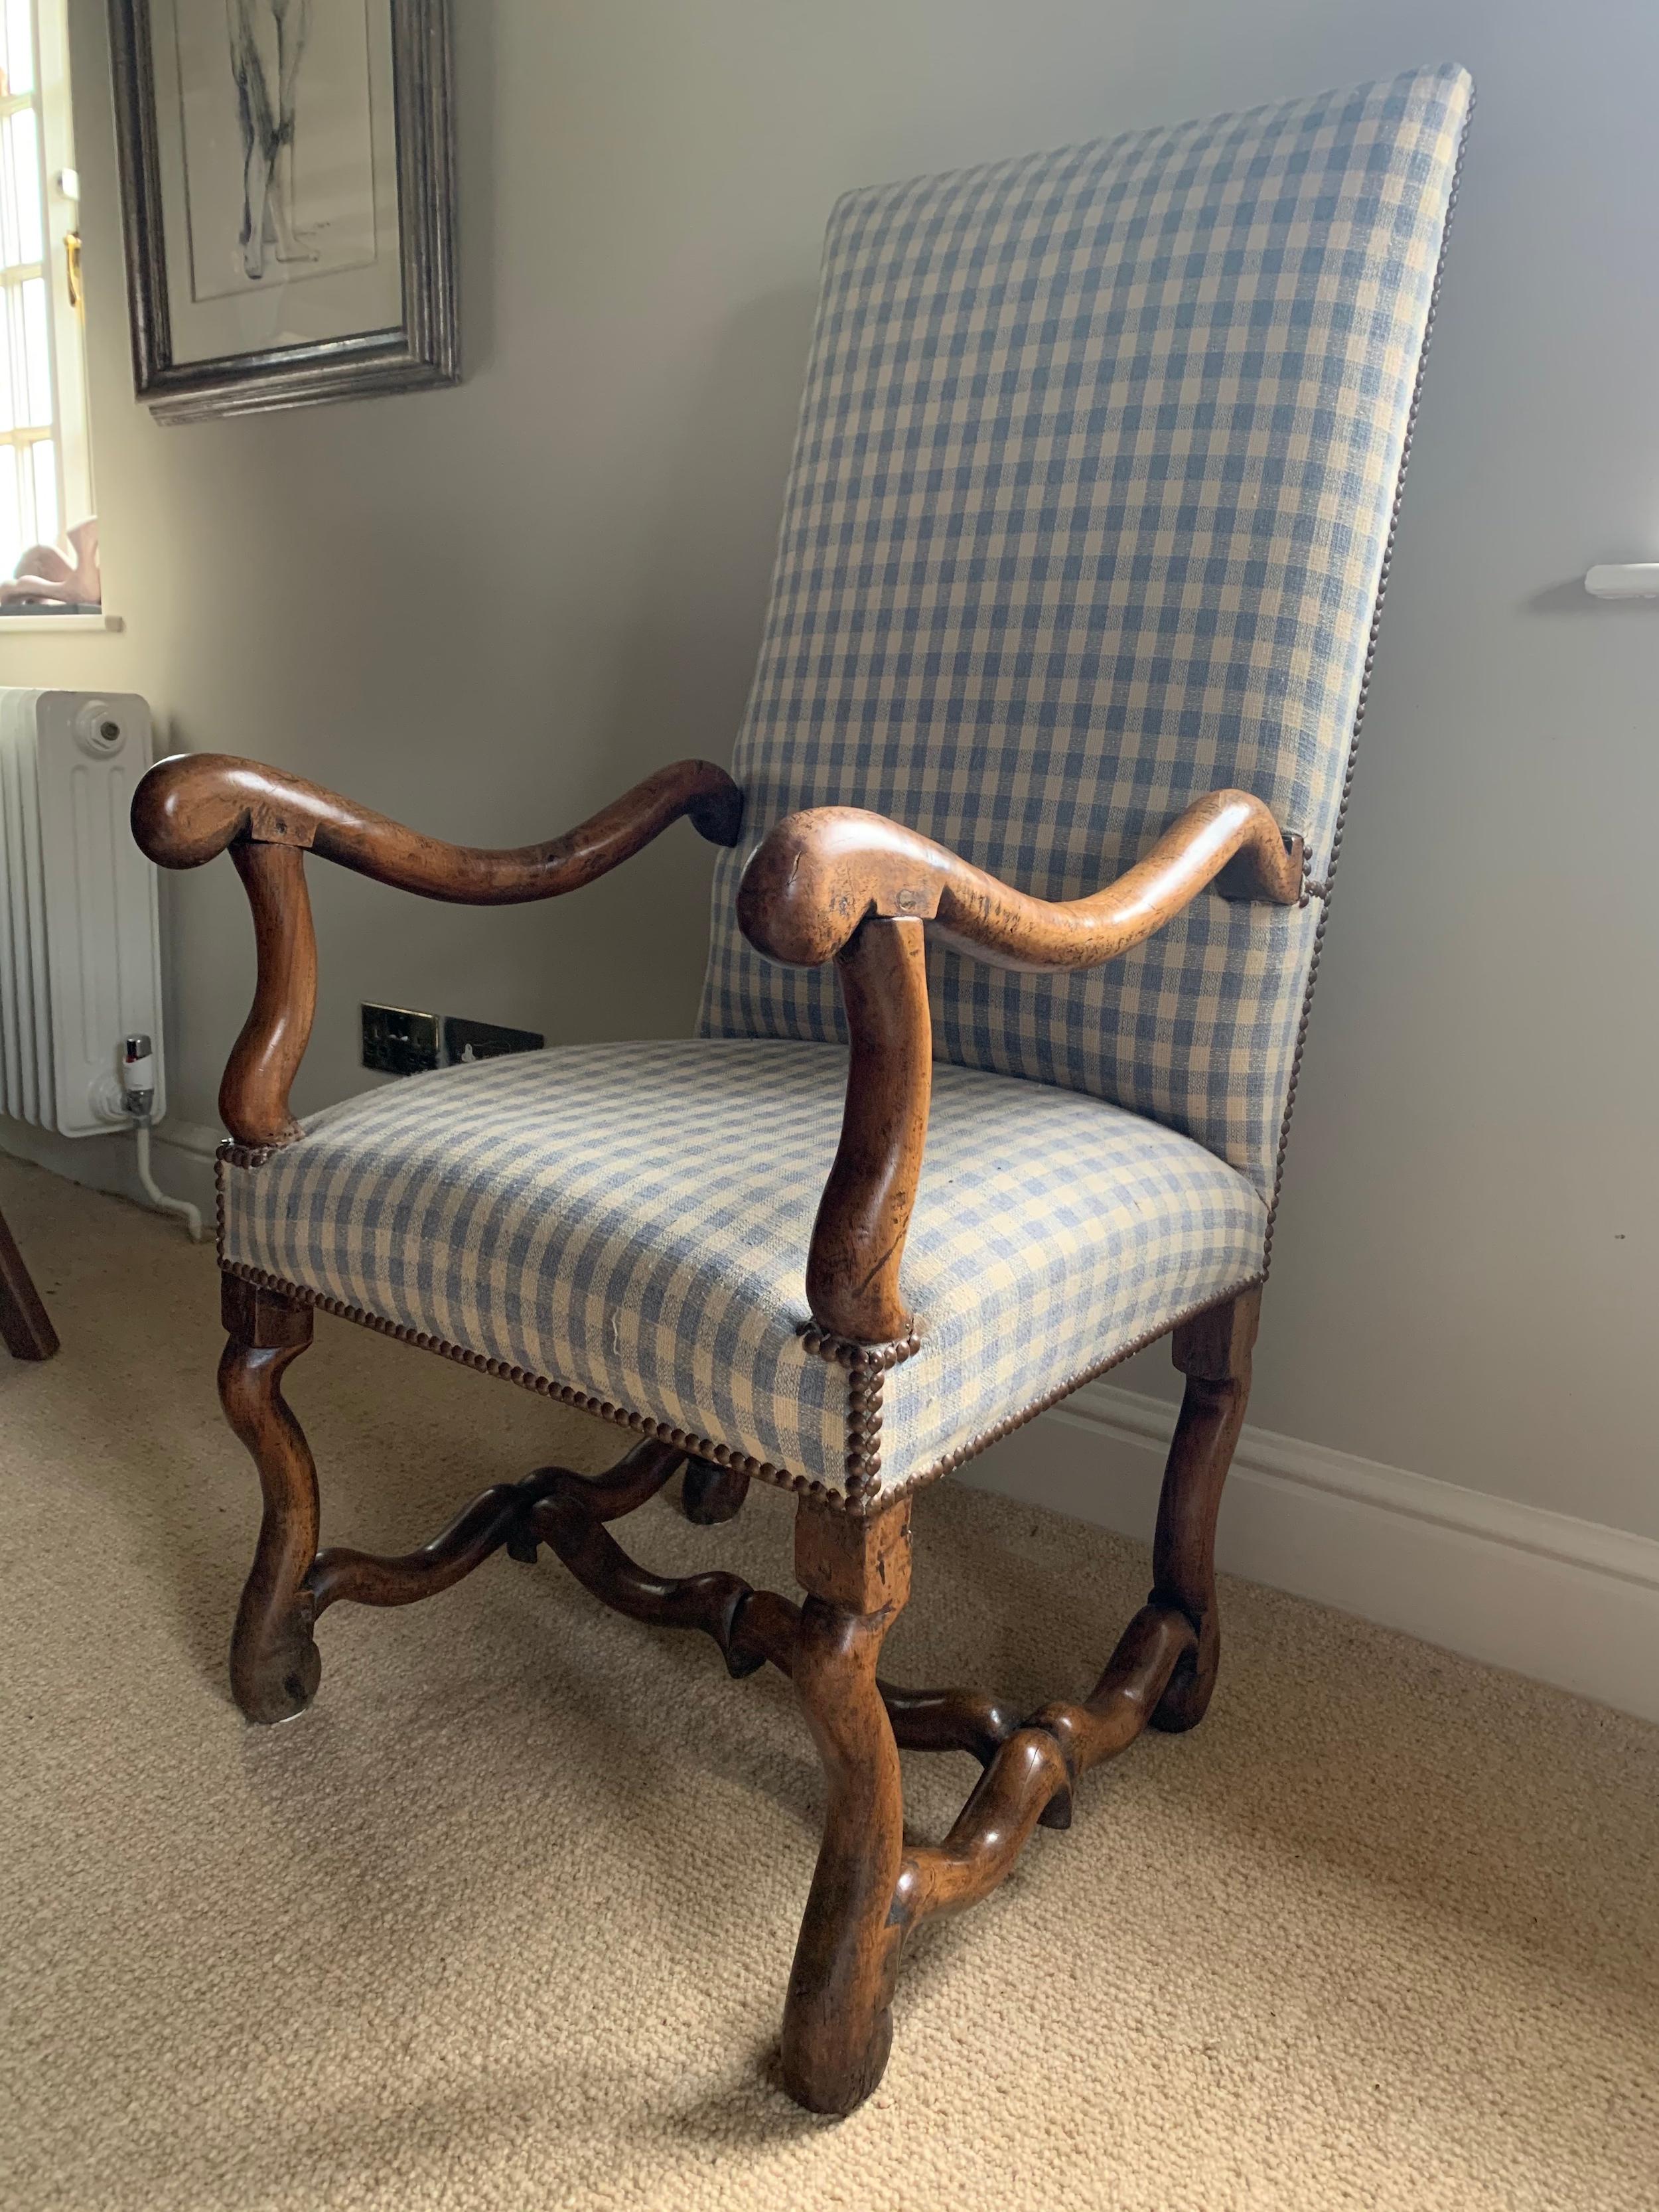 The outside and inside rectangular back and seat re-upholstered, during its last ownership, with an off-white and grey/blue cotton/linen mix fabric faced with close nailed brass studs. The walnut scroll arms are supported scroll uprights on ‘os de